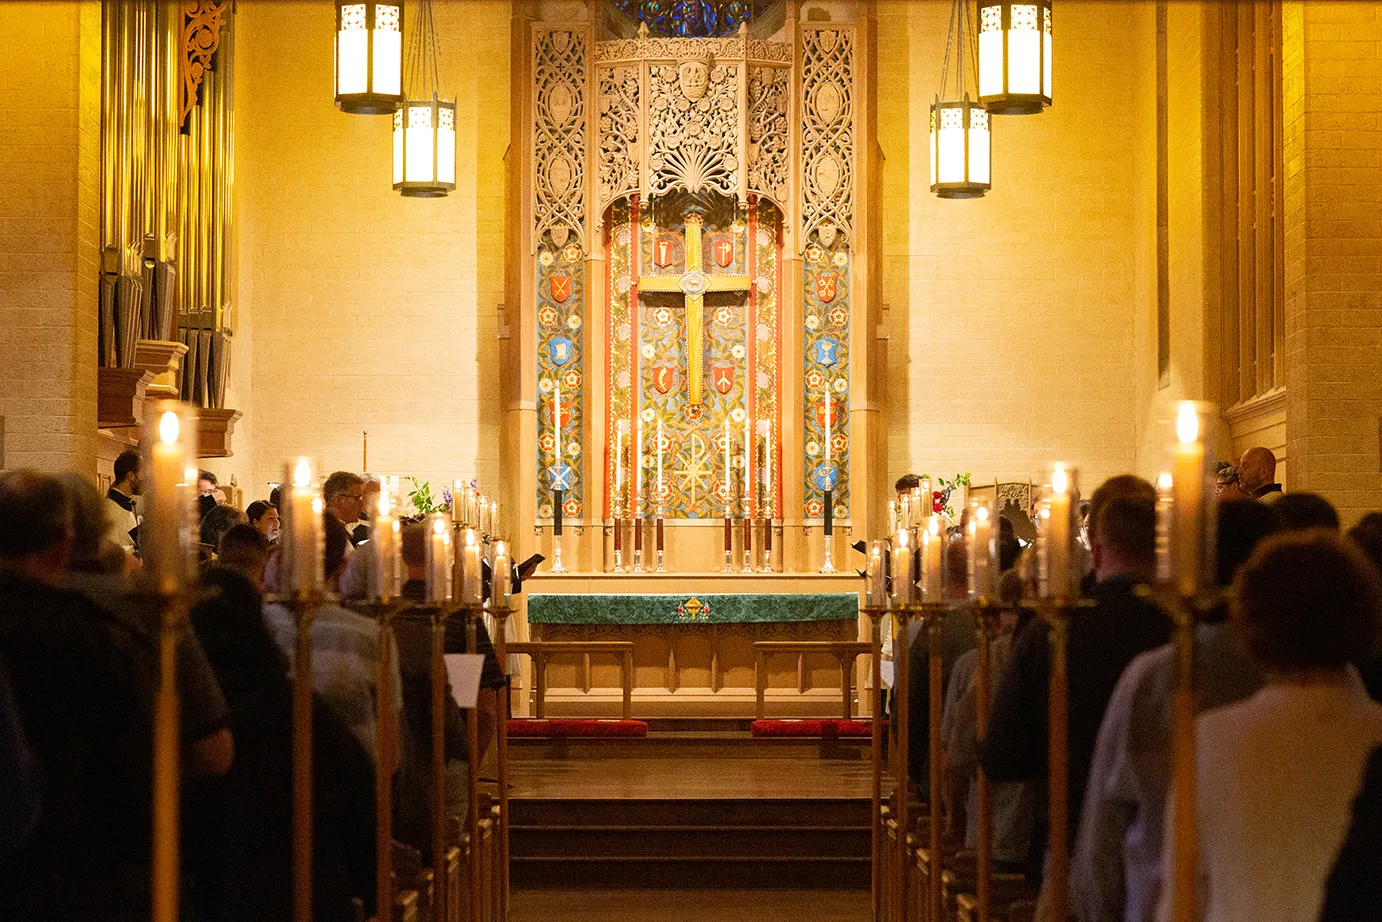 Interior of Epiphany Seattle during Evensong performance